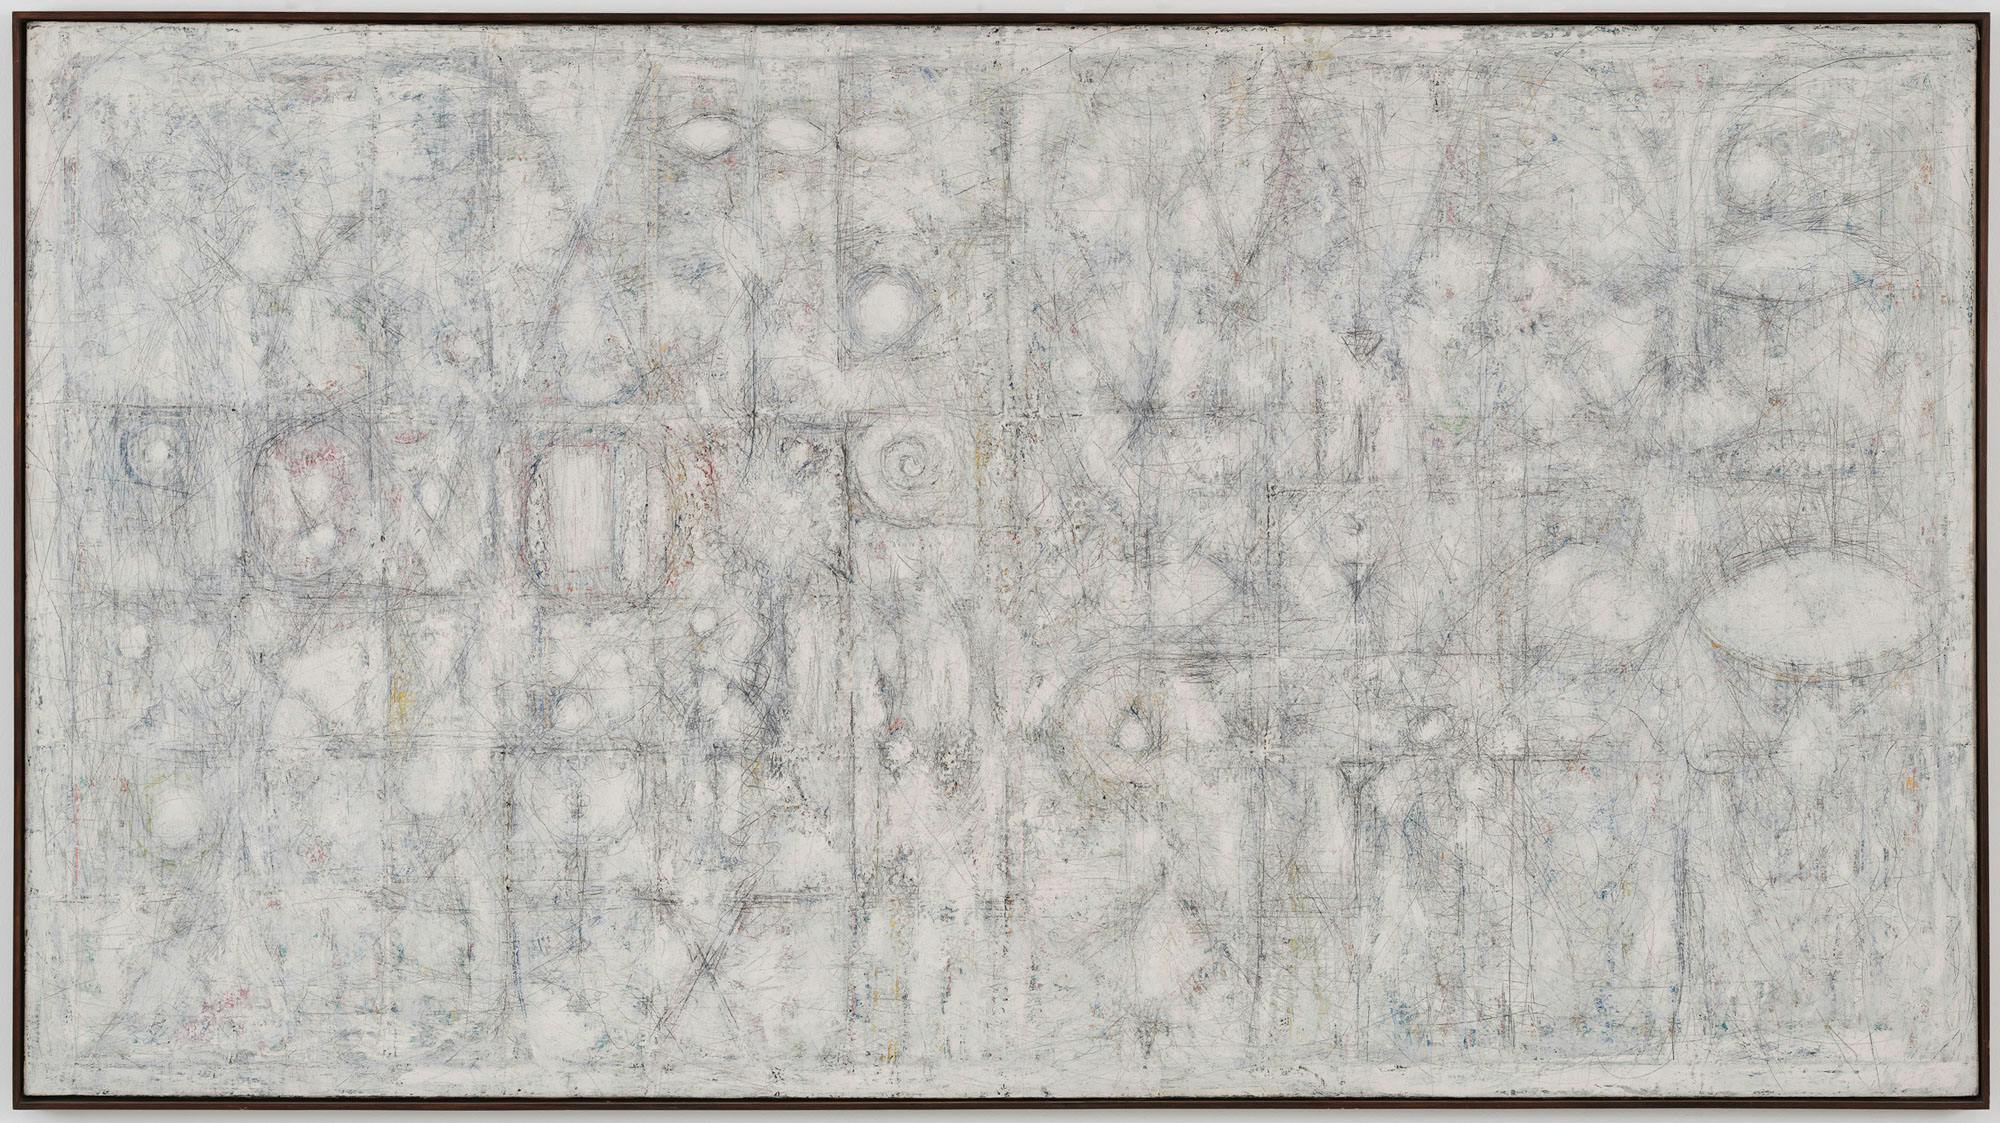 Chavade
1951
Oil and graphite on canvas
53 3/8 x 96 1/2 in. (135.6 x 245.1 cm)  
The Museum of Modern Art, New York, Philip Johnson Fund (503.1969)
 – The Richard Pousette-Dart Foundation